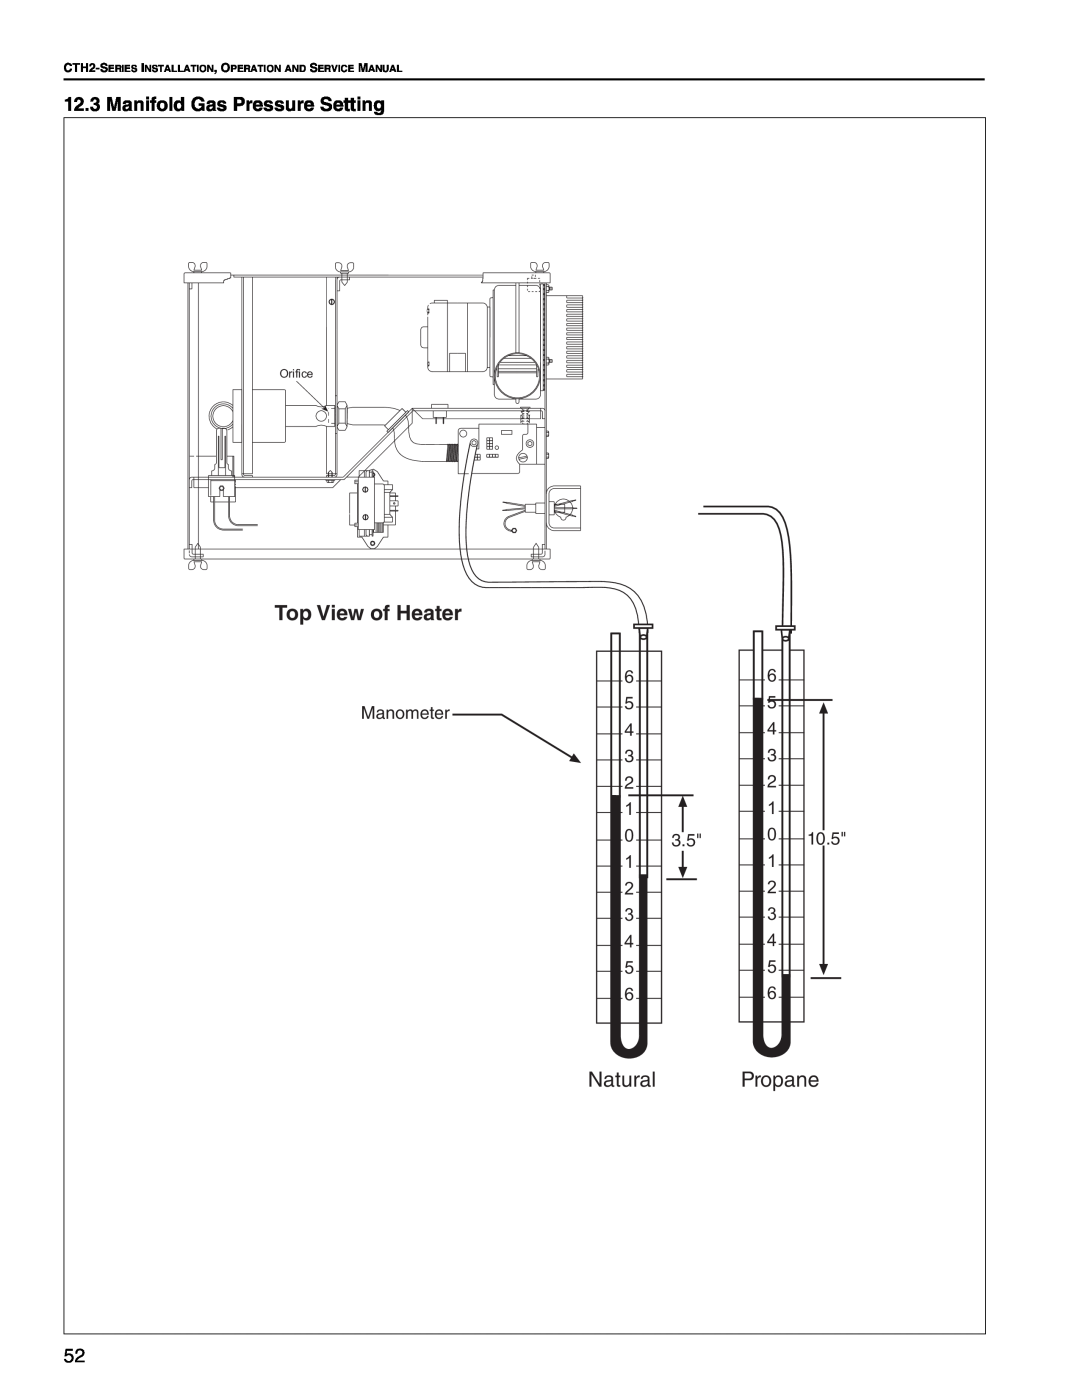 Roberts Gorden CTH2-175, CTH2-125, CTH2-80 Natural Propane, Manifold Gas Pressure Setting, Top View of Heater, Orifice 